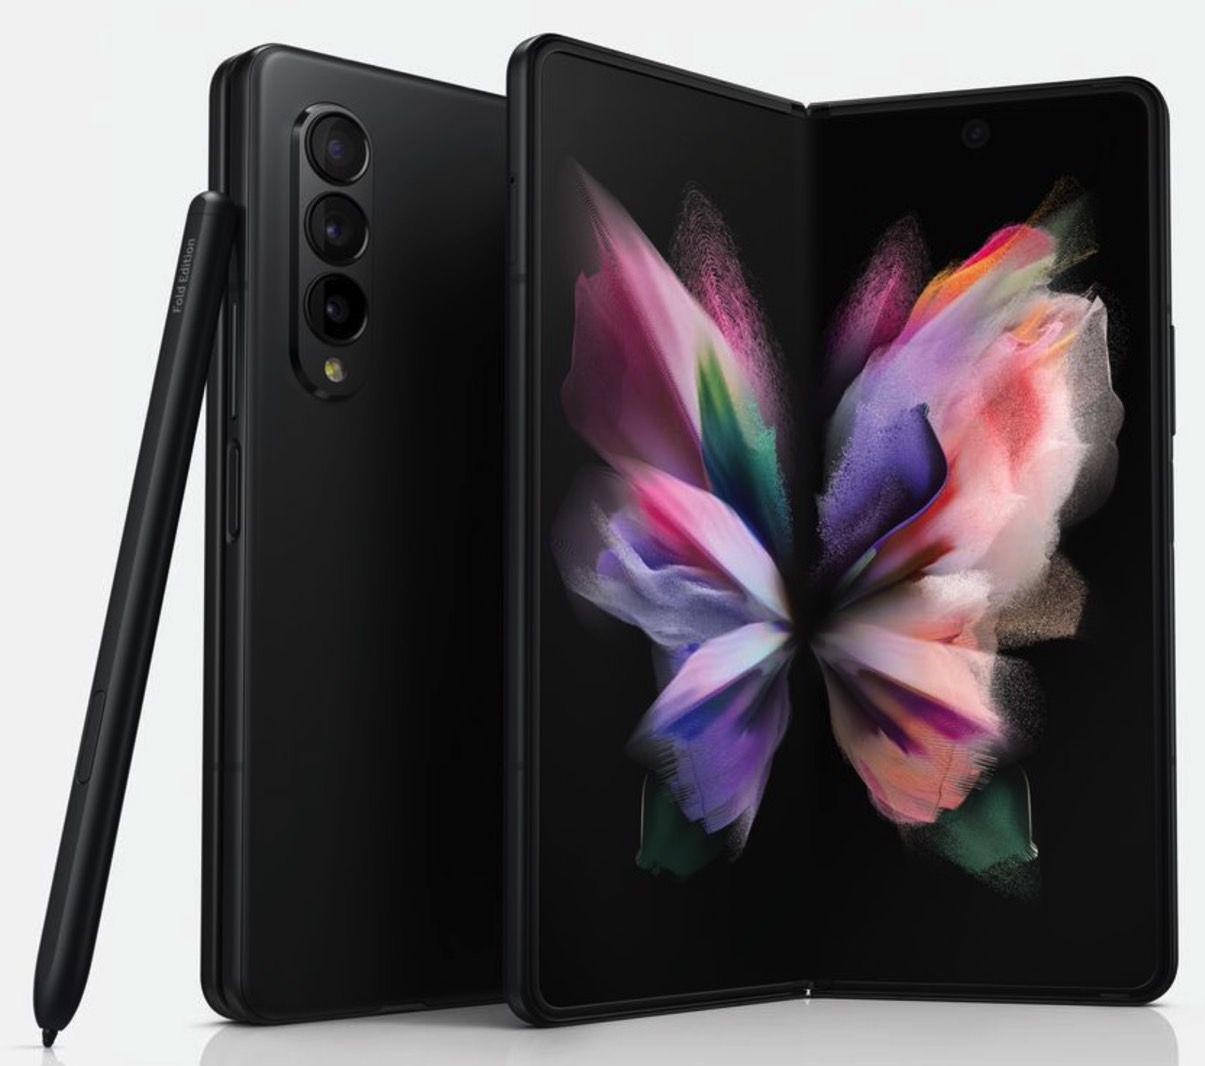 Samsung's latest Galaxy Fold adds stylus support, waterproofing